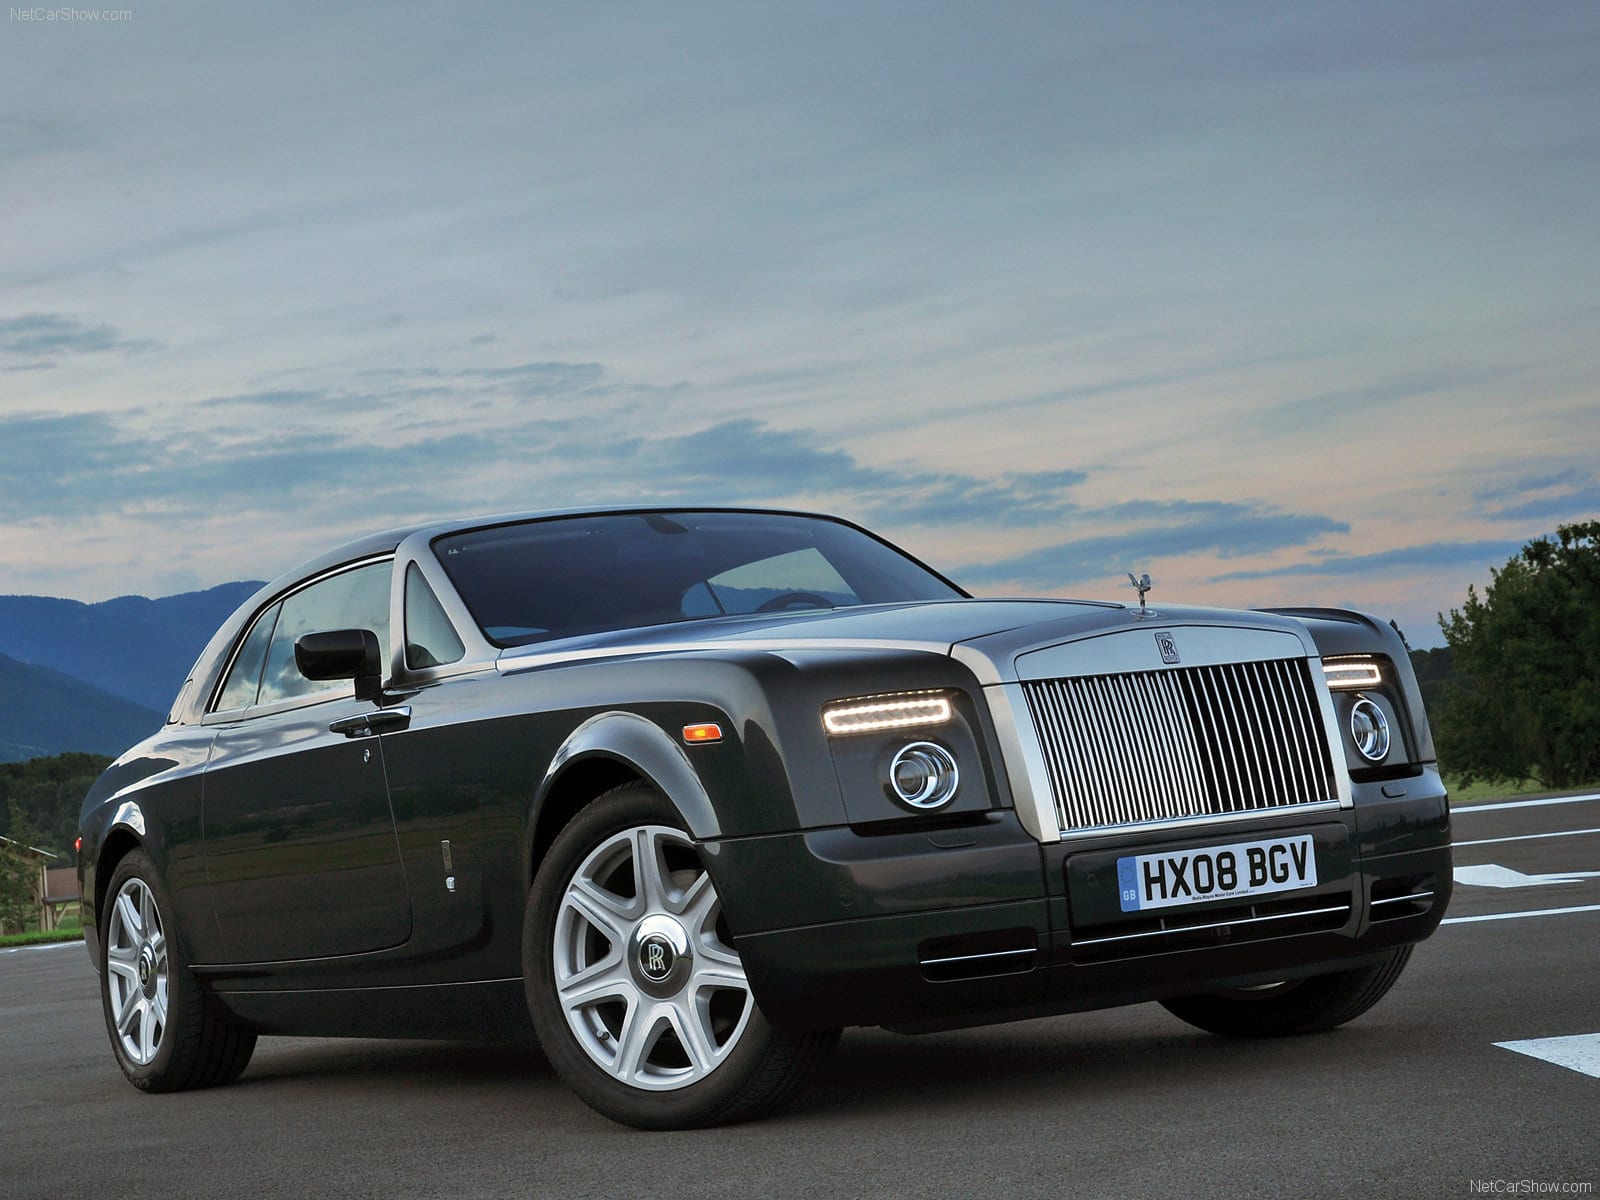 Car Rolls Royce Luxury Cars British Cars Frontal View Licence Plates Sky Clouds Vehicle Headlights W 1600x1200